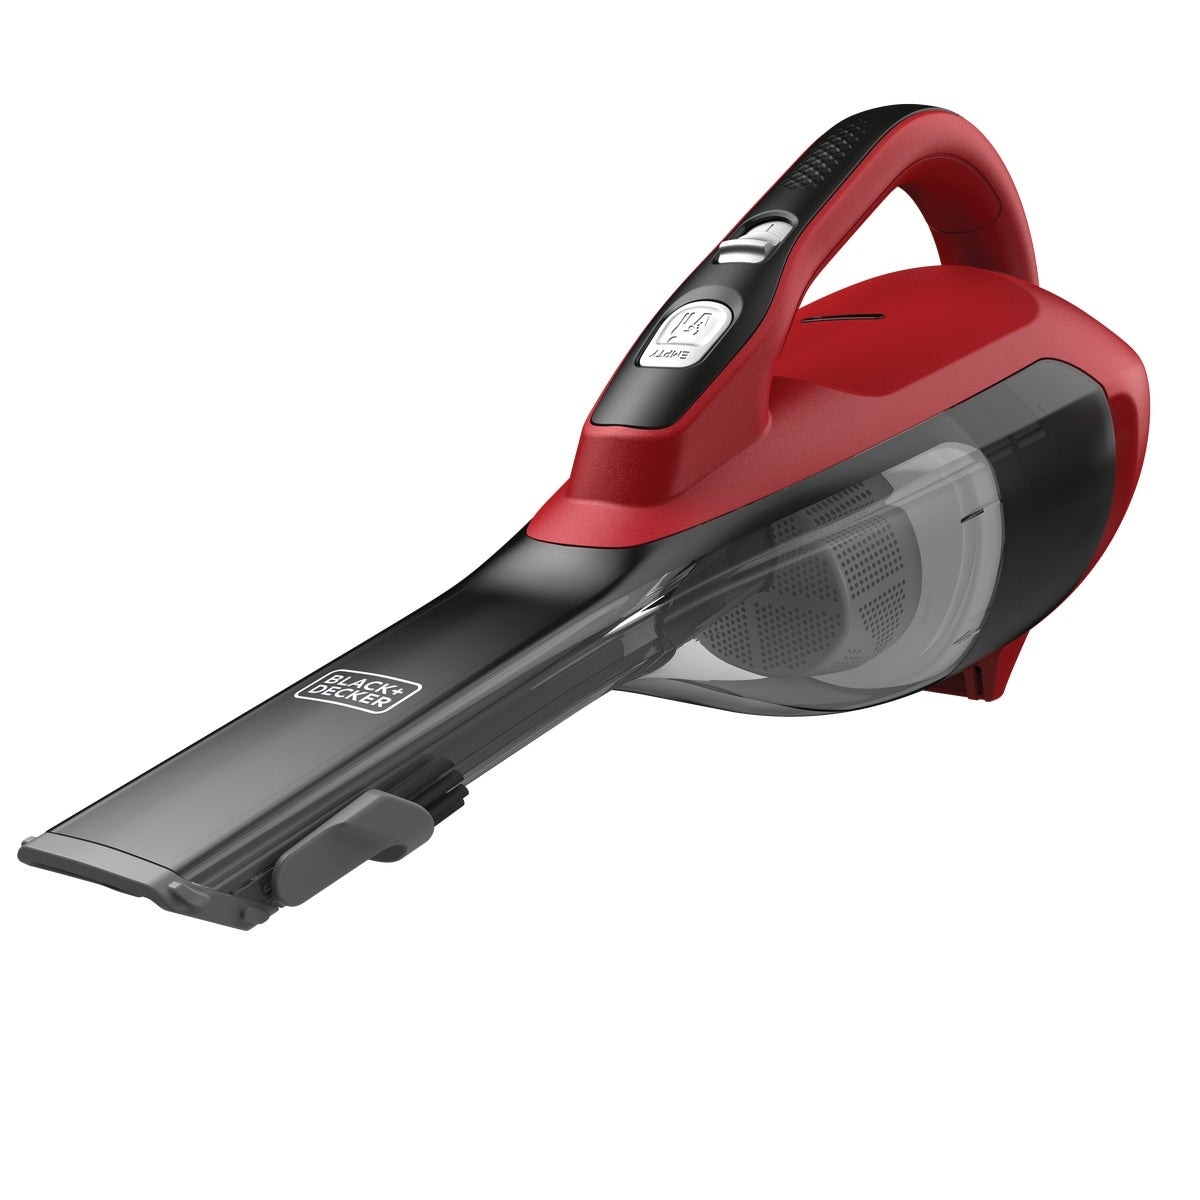 https://ak1.ostkcdn.com/images/products/is/images/direct/688749601ae5c45244f3f09438dfaf64d1463f1b/Black-%26-Decker-Dustbuster-10.8V-2.0AH-Chili-Red-Cordless-Handheld-Vacuum-Cleaner---1-Each.jpg